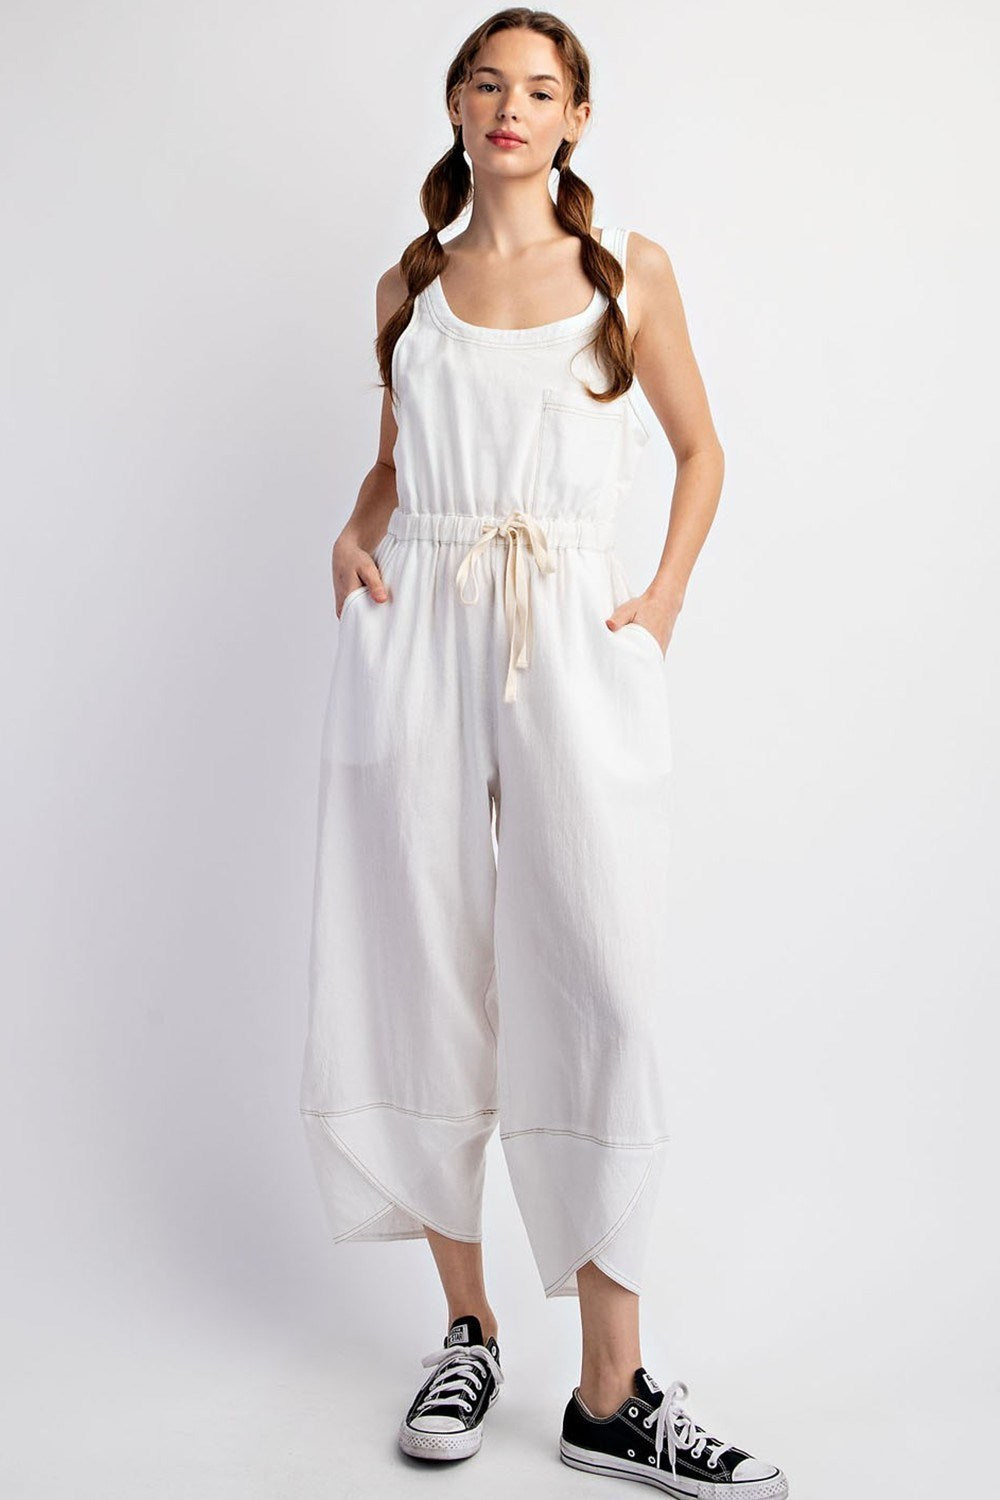 Mineral Washed Waist Tie Jumpsuit in White